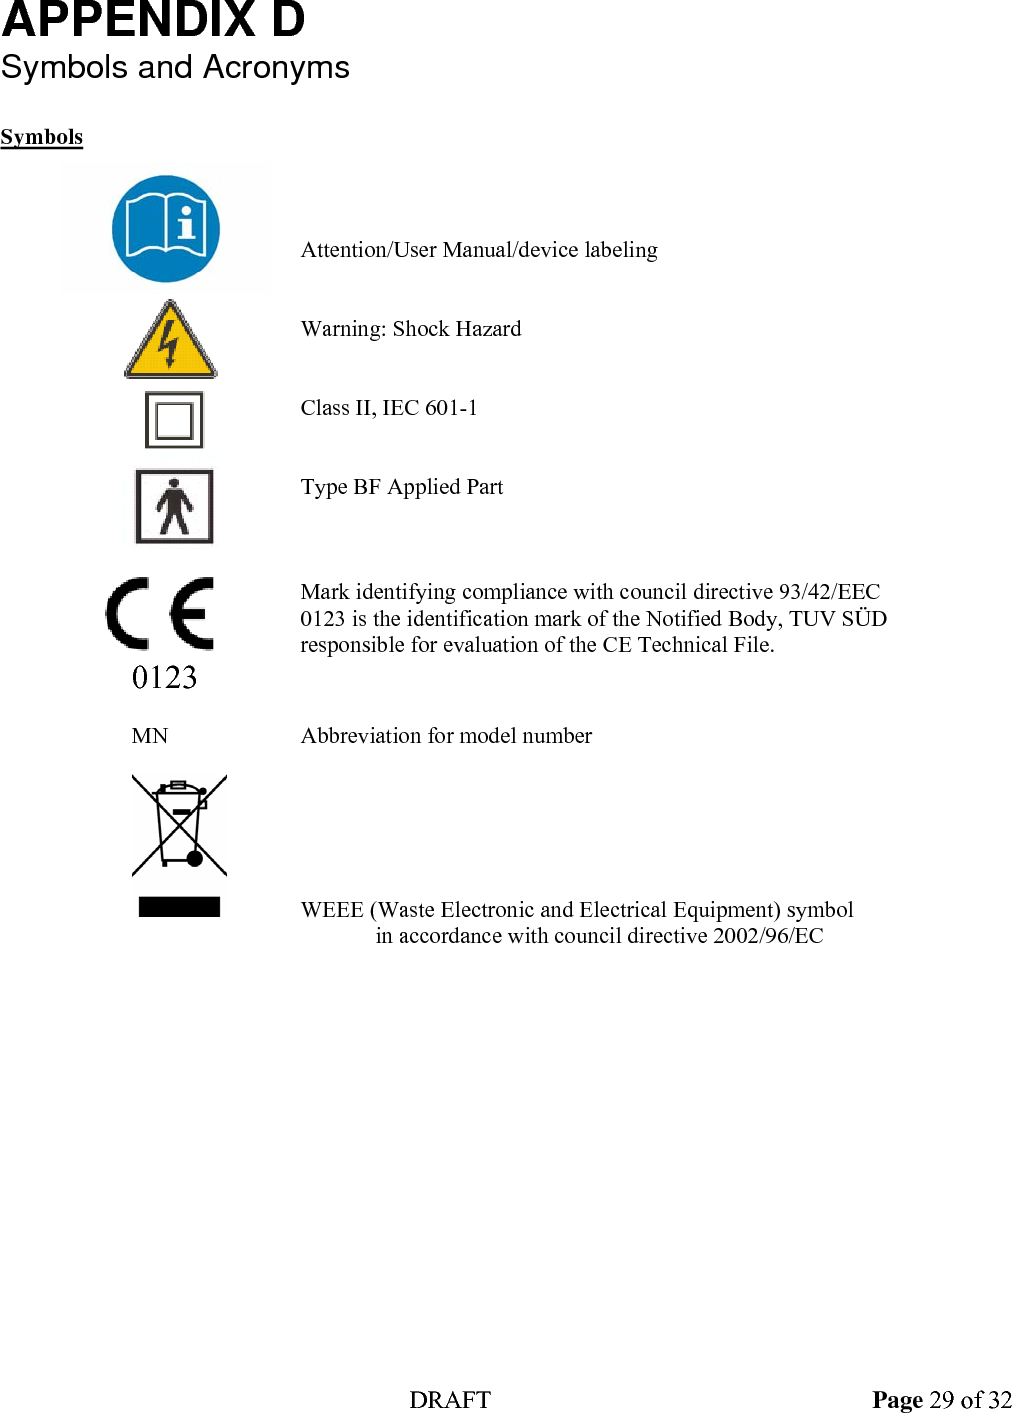  DRAFT Page 29 of 32 APPENDIX D Symbols and Acronyms  Symbols        Attention/User Manual/device labeling            Warning: Shock Hazard                Class II, IEC 601-1       Type BF Applied Part    Mark identifying compliance with council directive 93/42/EEC       0123 is the identification mark of the Notified Body, TUV SÜD       responsible for evaluation of the CE Technical File.     0123  MN    Abbreviation for model number    WEEE (Waste Electronic and Electrical Equipment) symbol          in accordance with council directive 2002/96/EC     